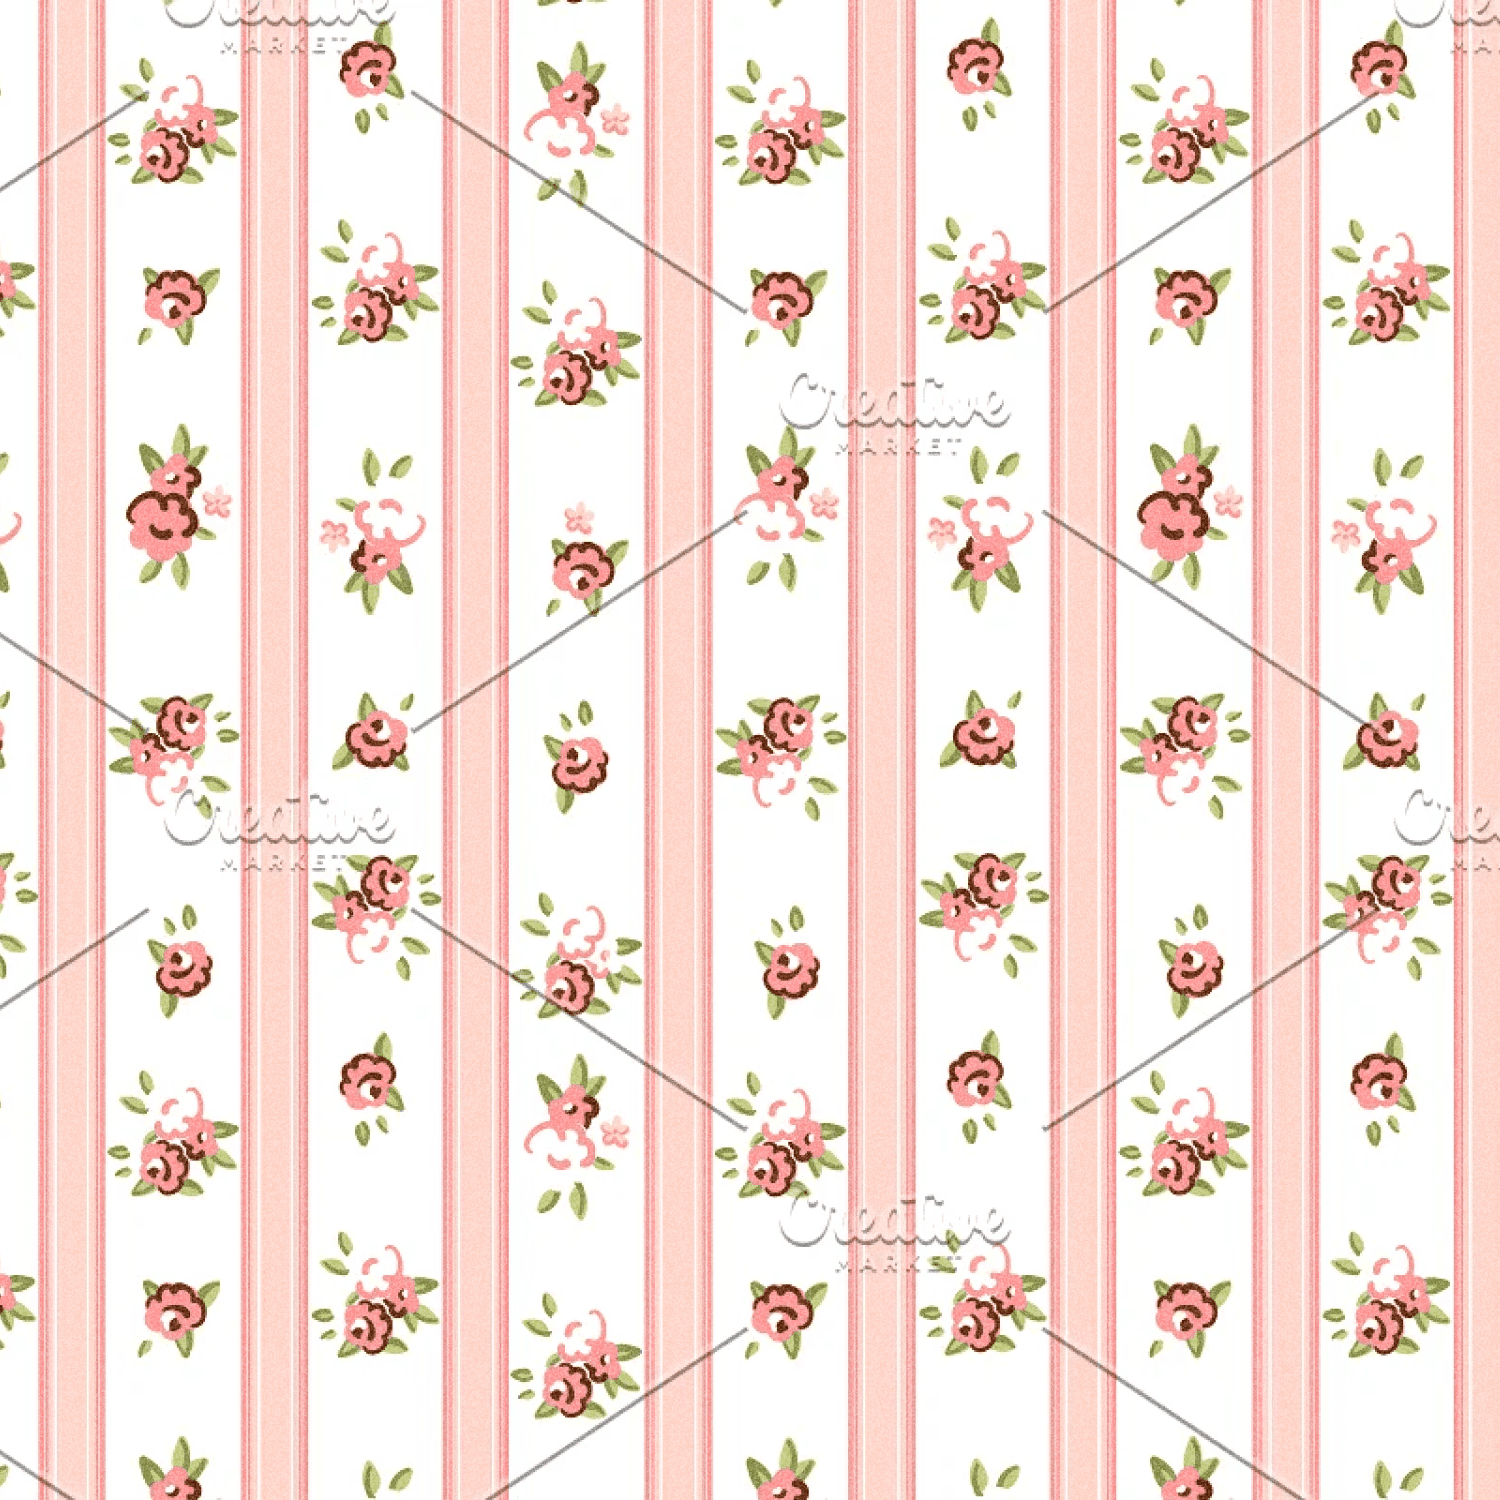 Shabby Chic Rose Digital Patterns cover.